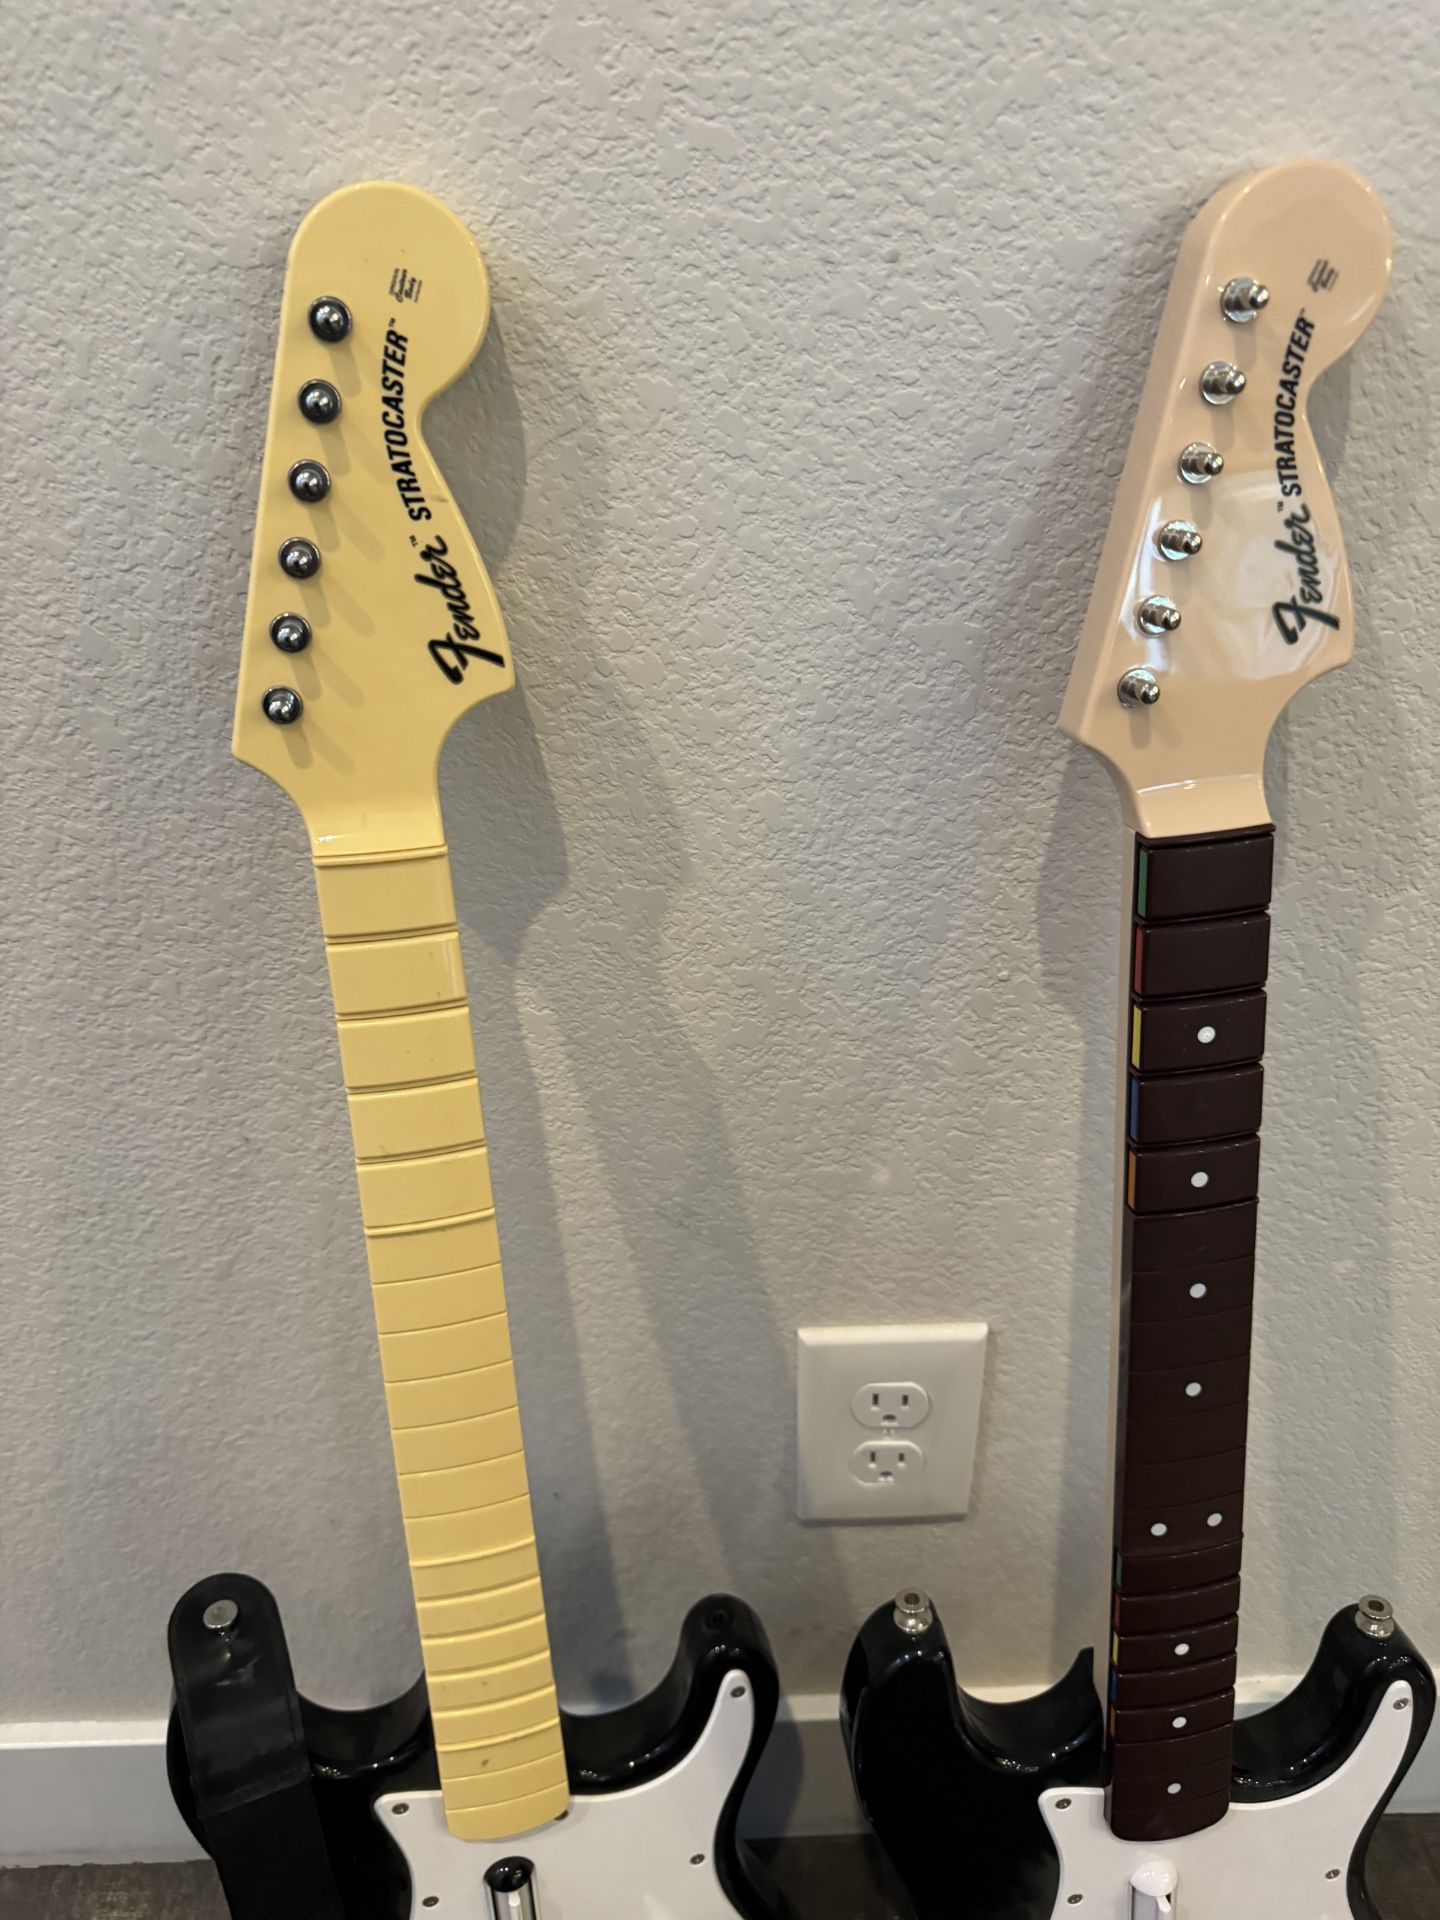 UNTESTED PLAYSTATION UNIT WITH 2 GUITAR HERO PLAYSTATION GUITARS - Image 3 of 4